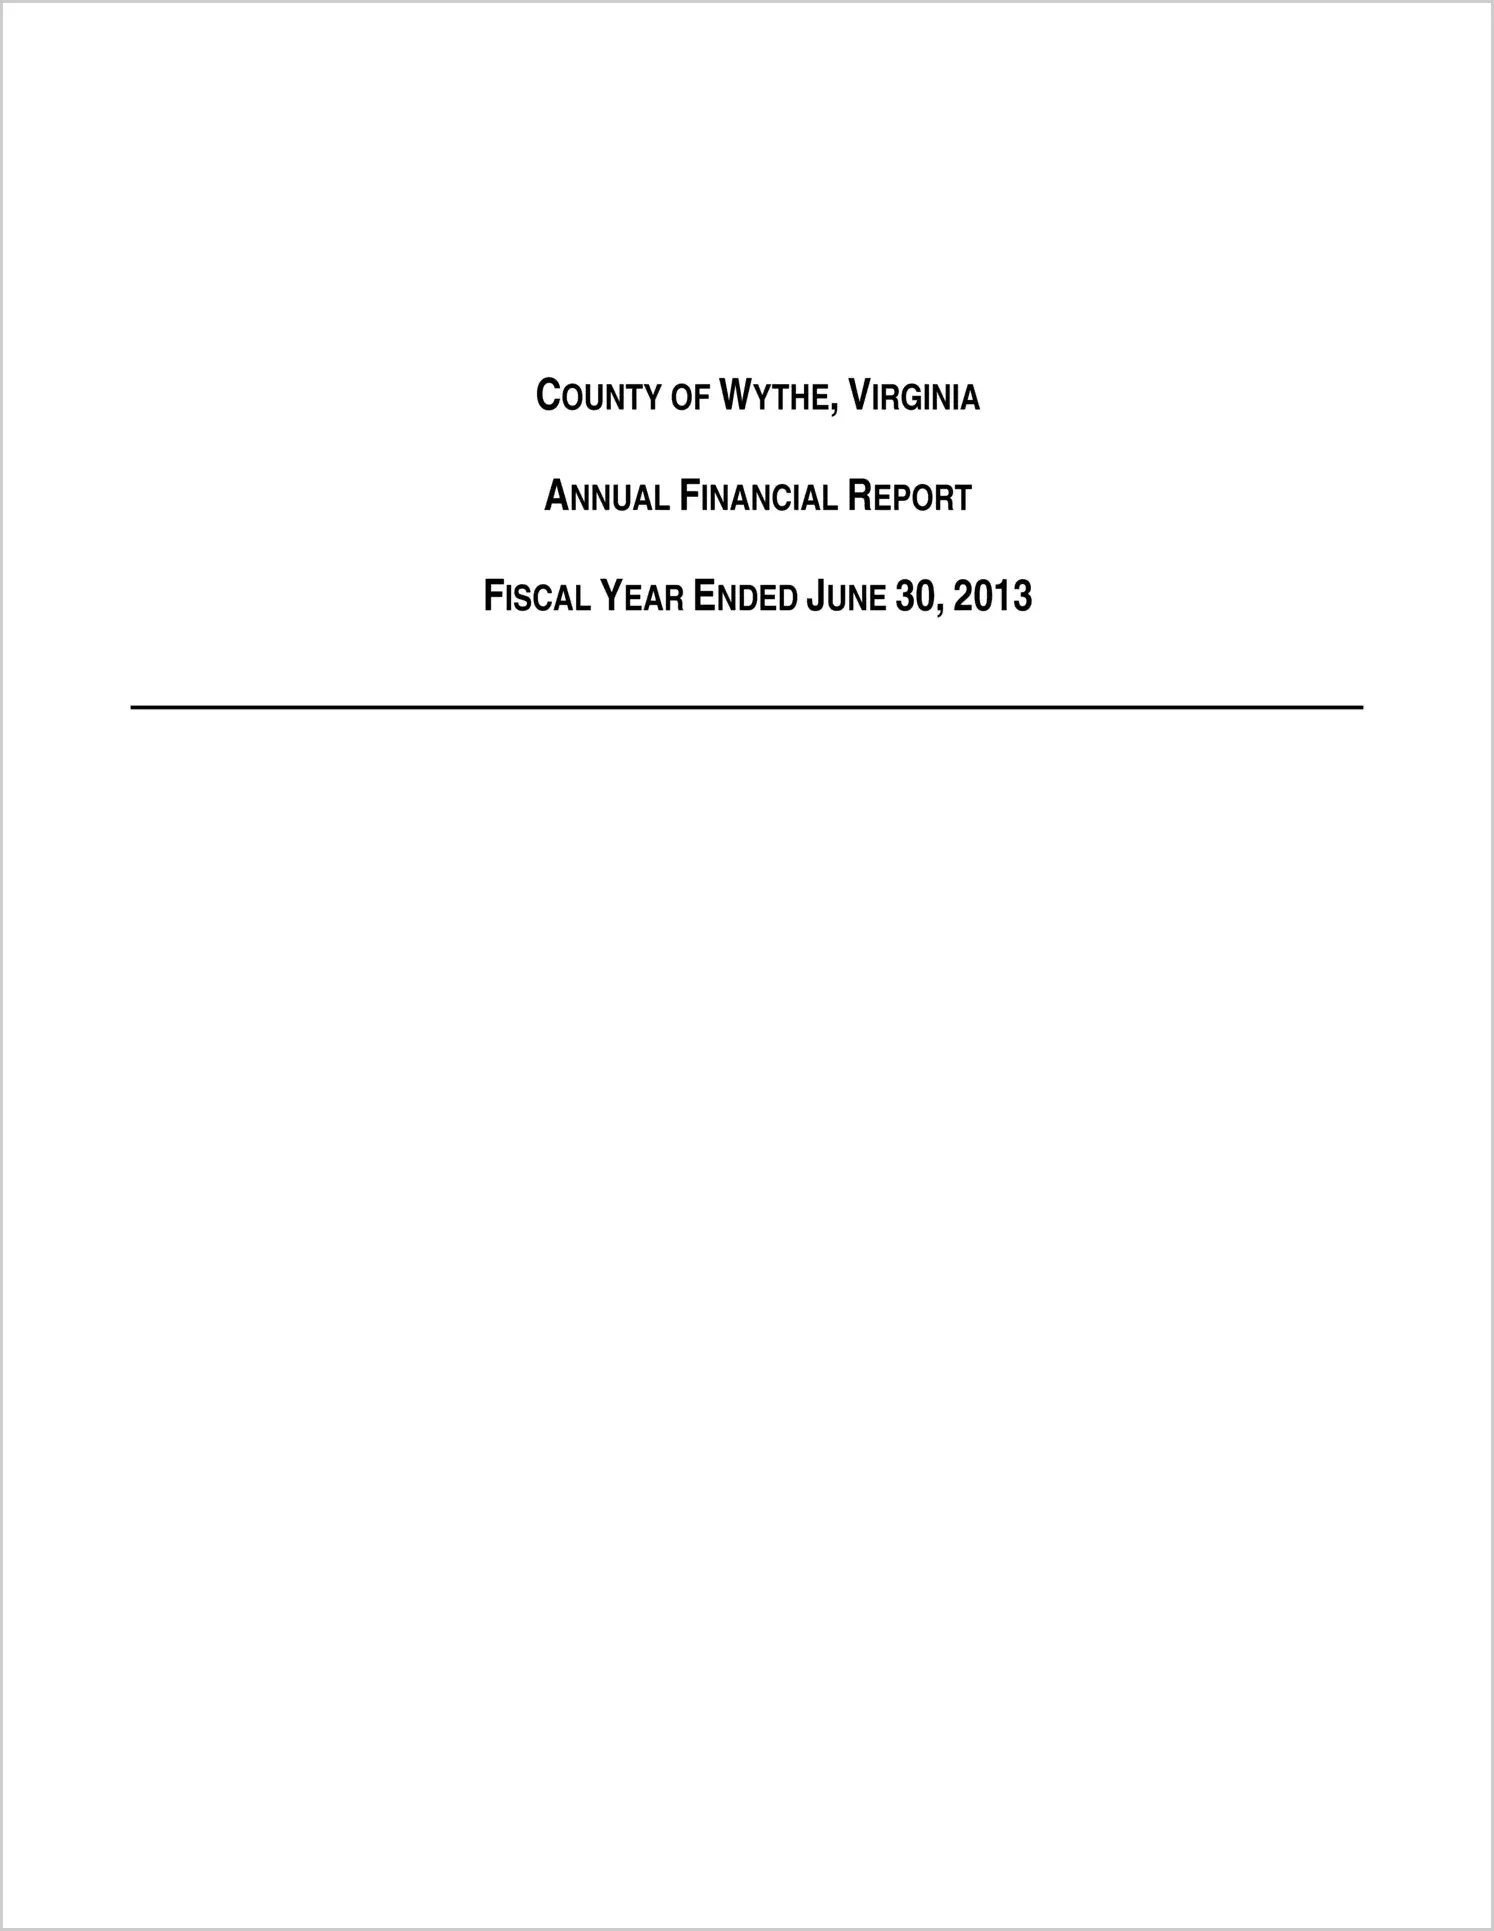 2013 Annual Financial Report for County of Wythe